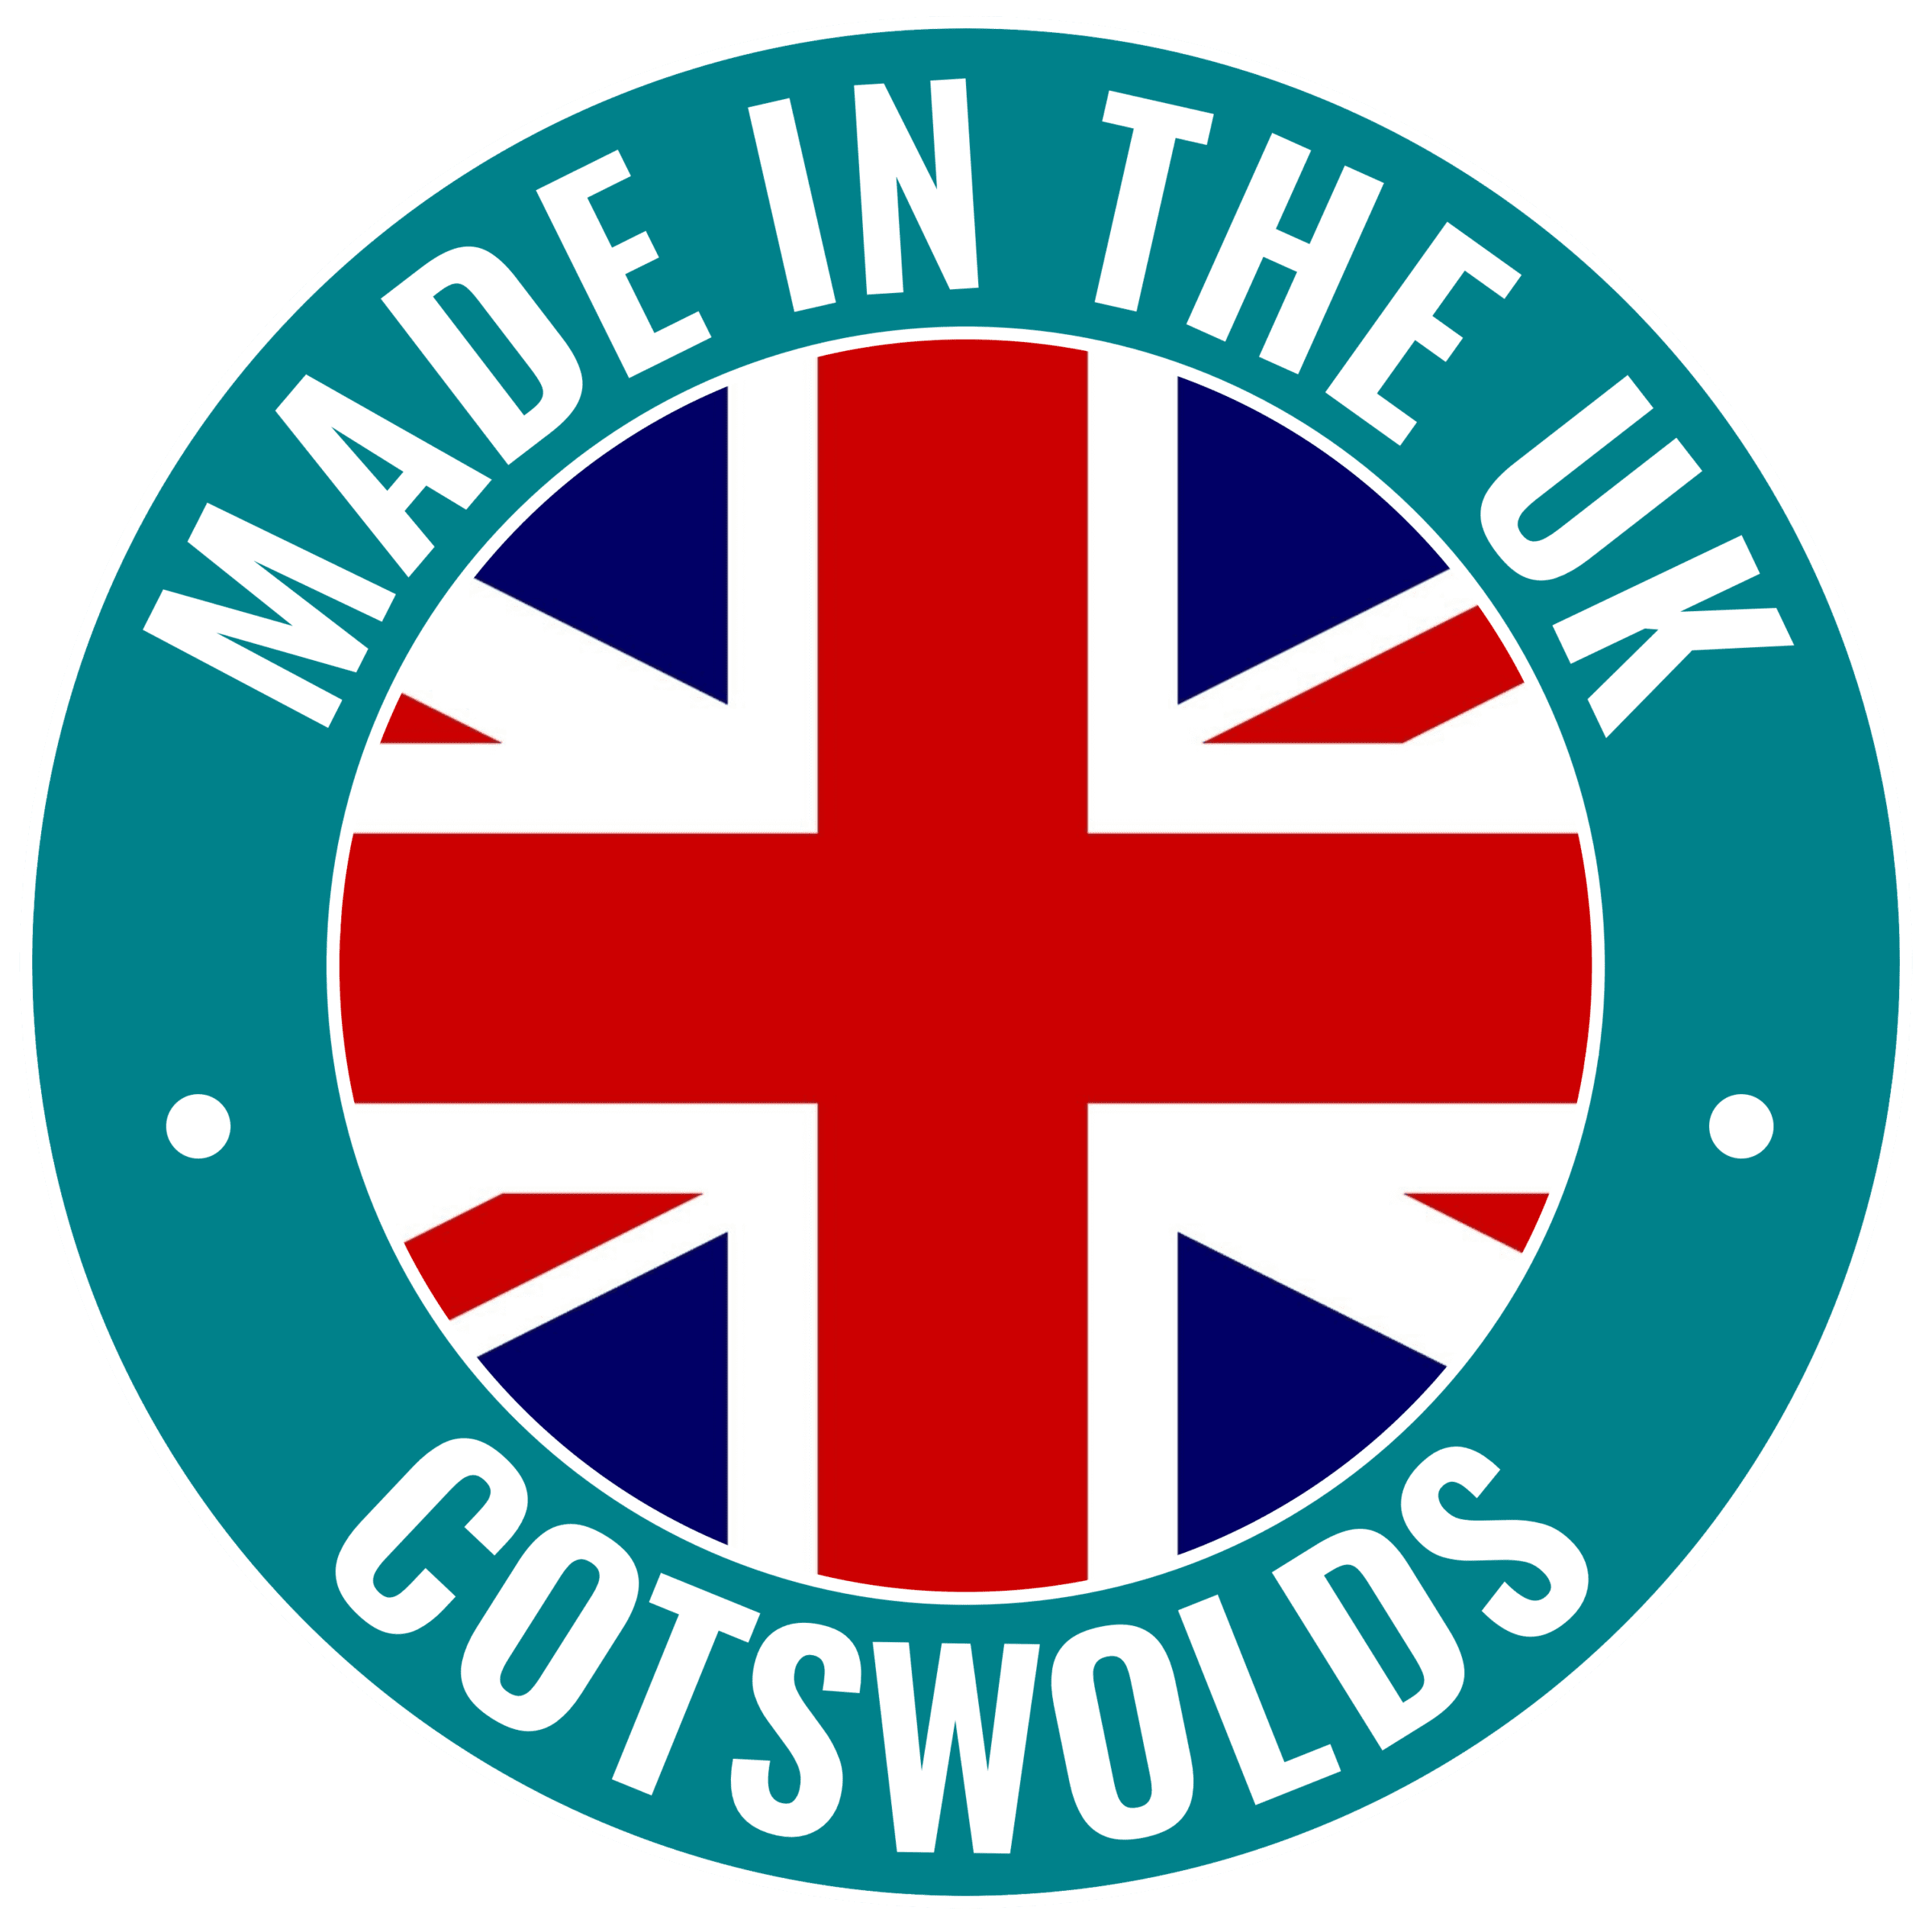 Made in the UK Cotswolds badge